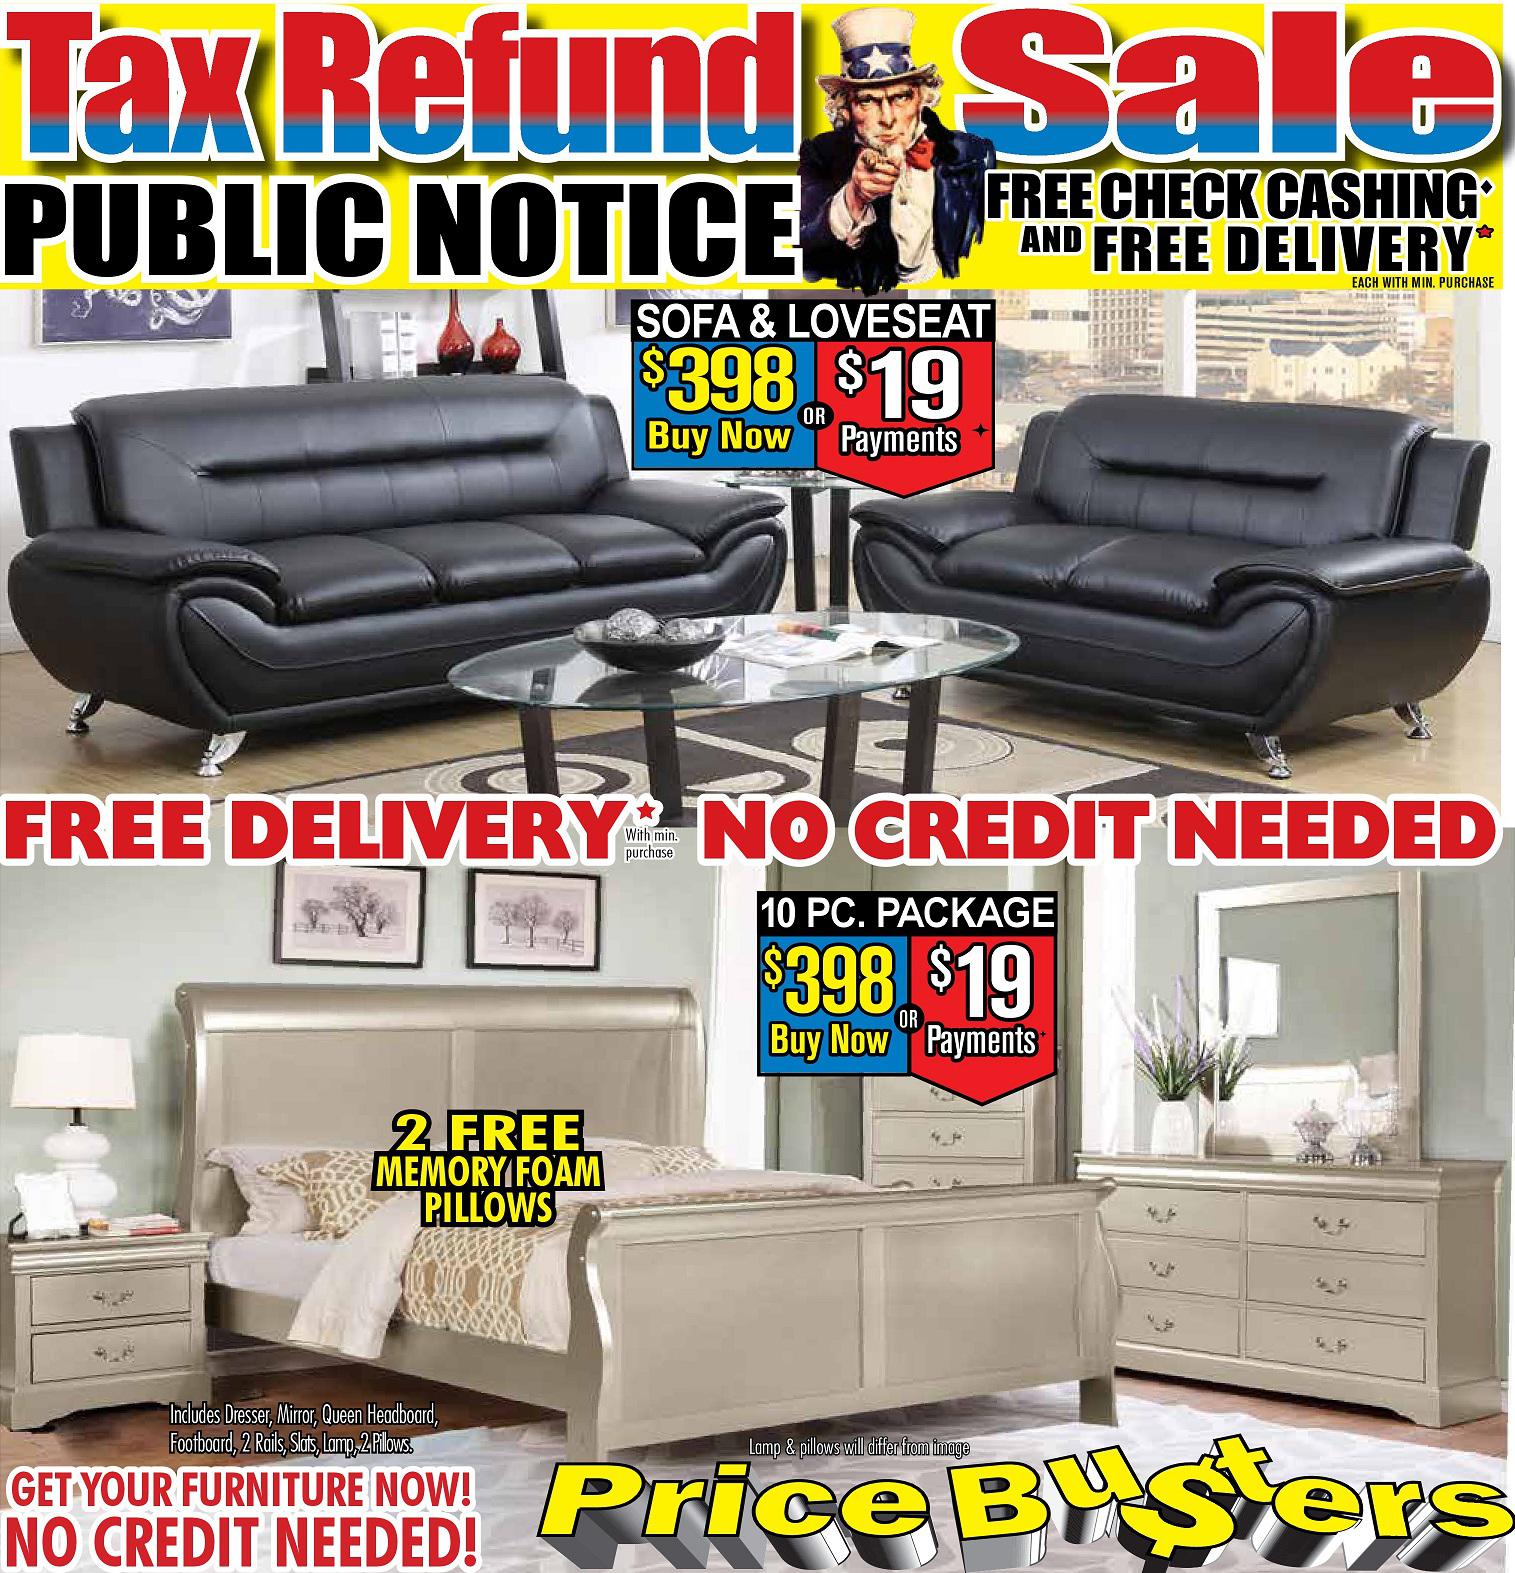 Price Busters Discount Furniture 800 E 25th St Baltimore Md